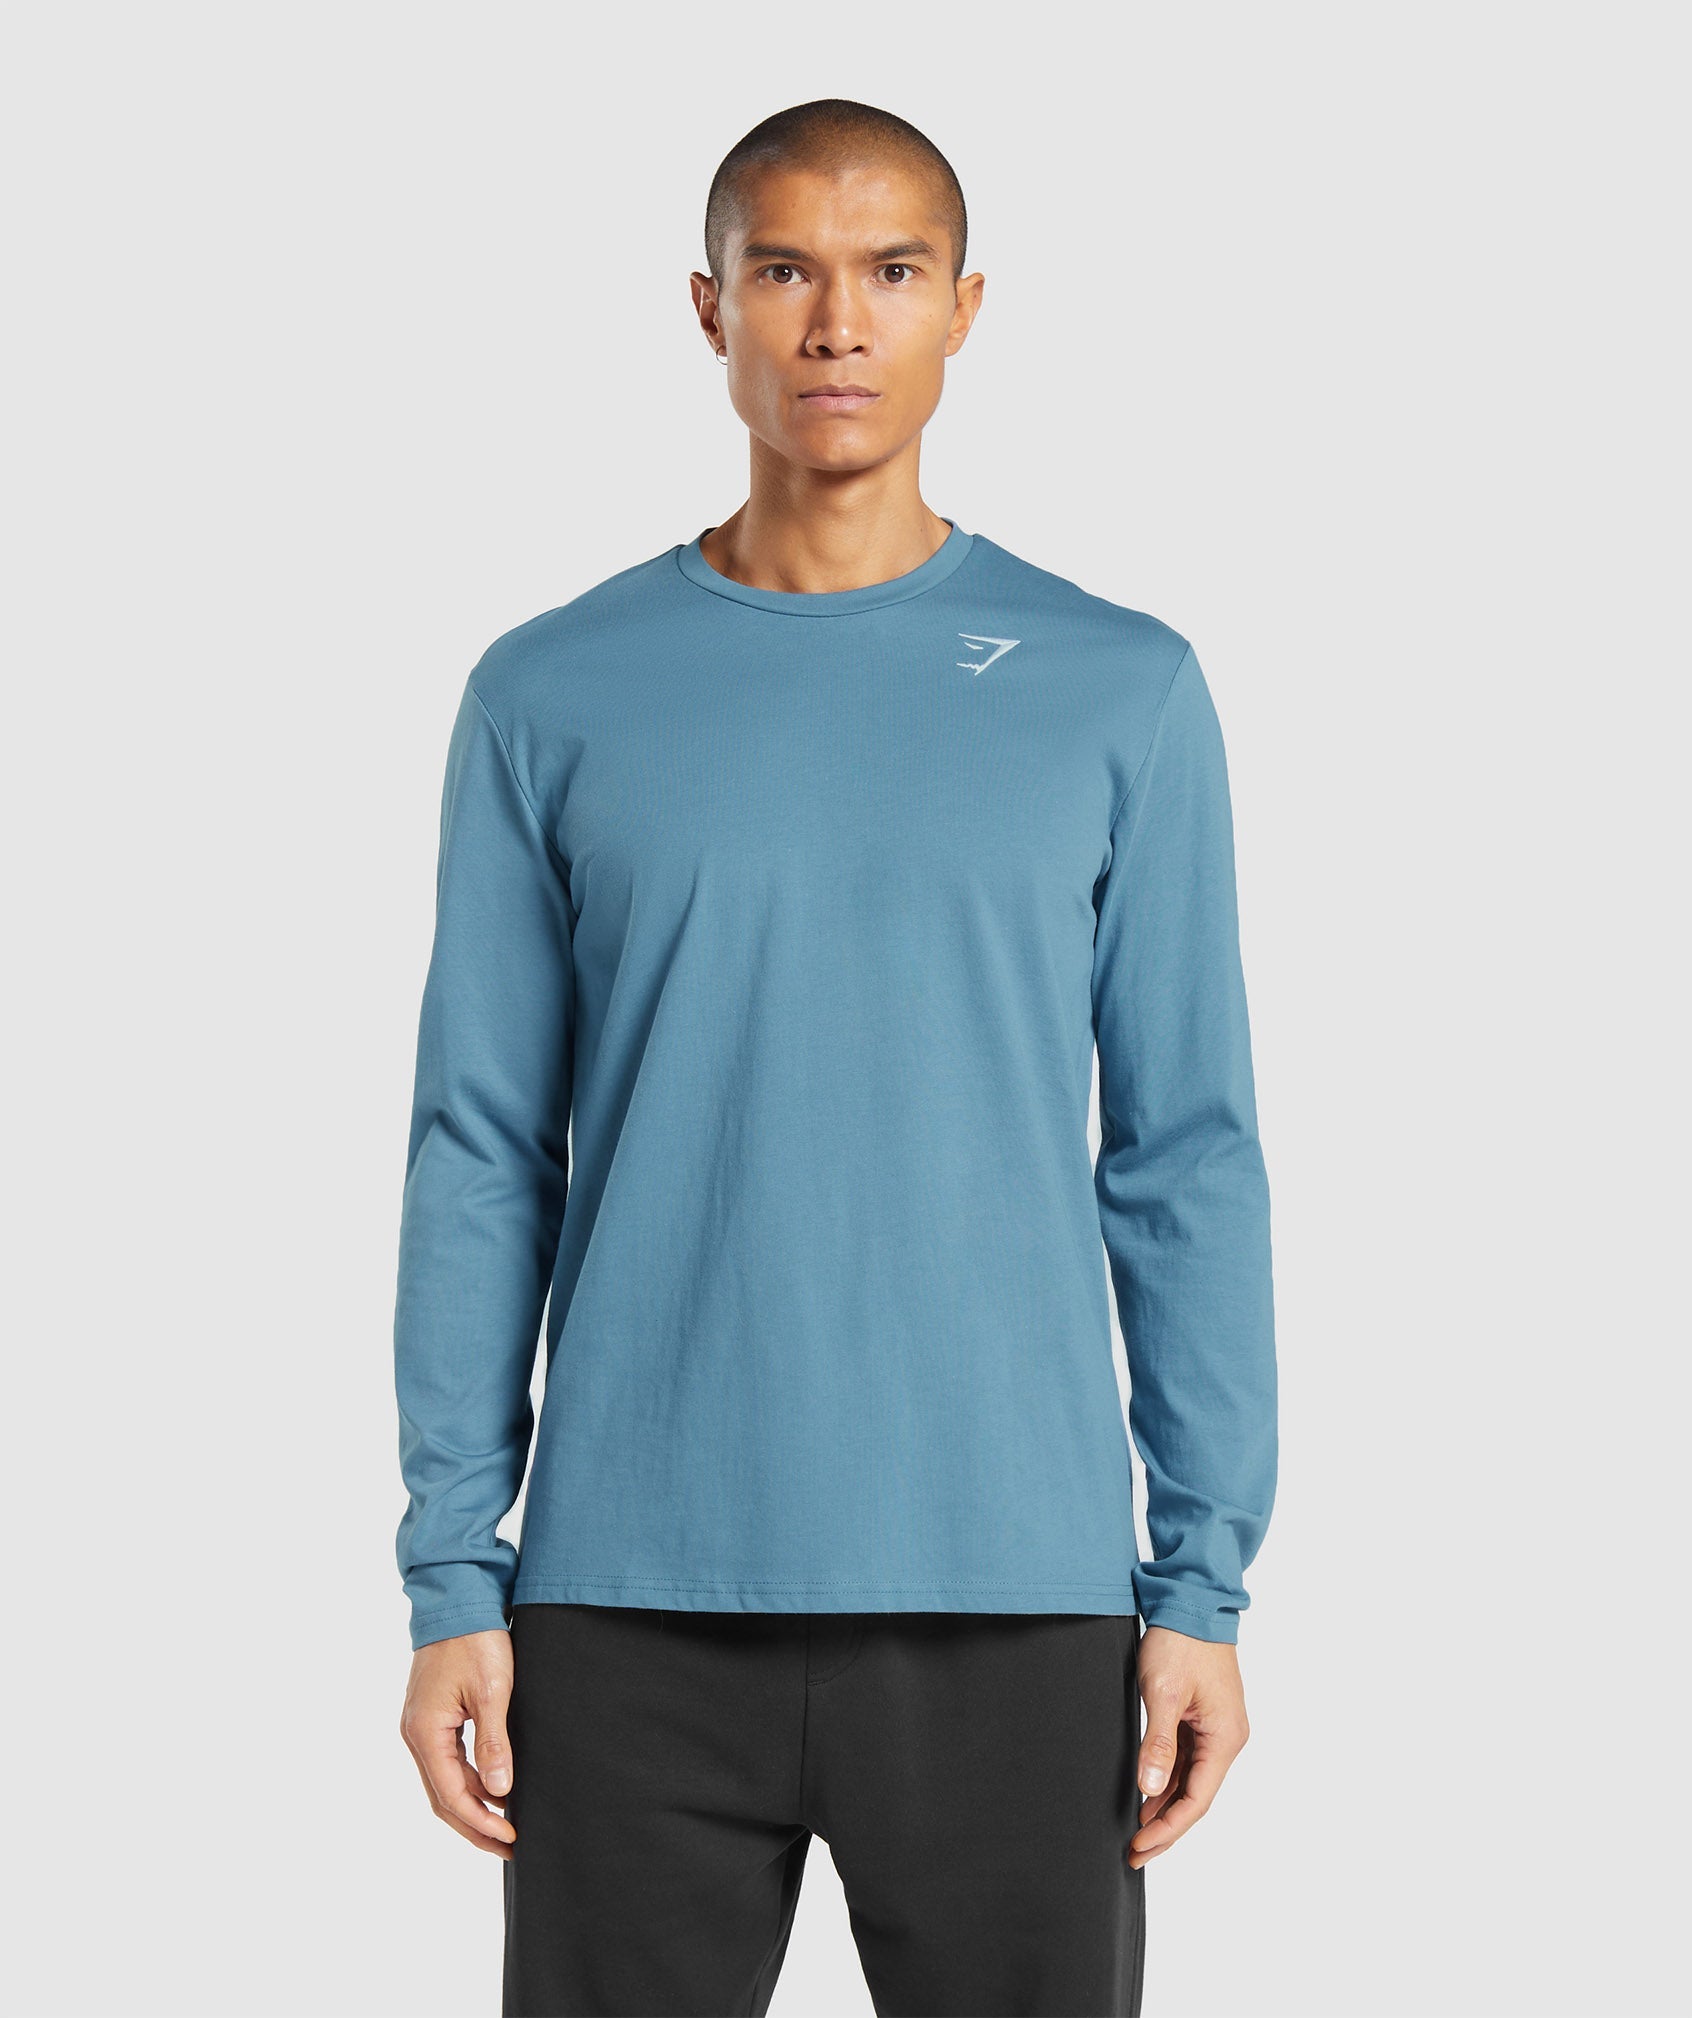 Crest Long Sleeve T-Shirt in Faded Blue - view 1